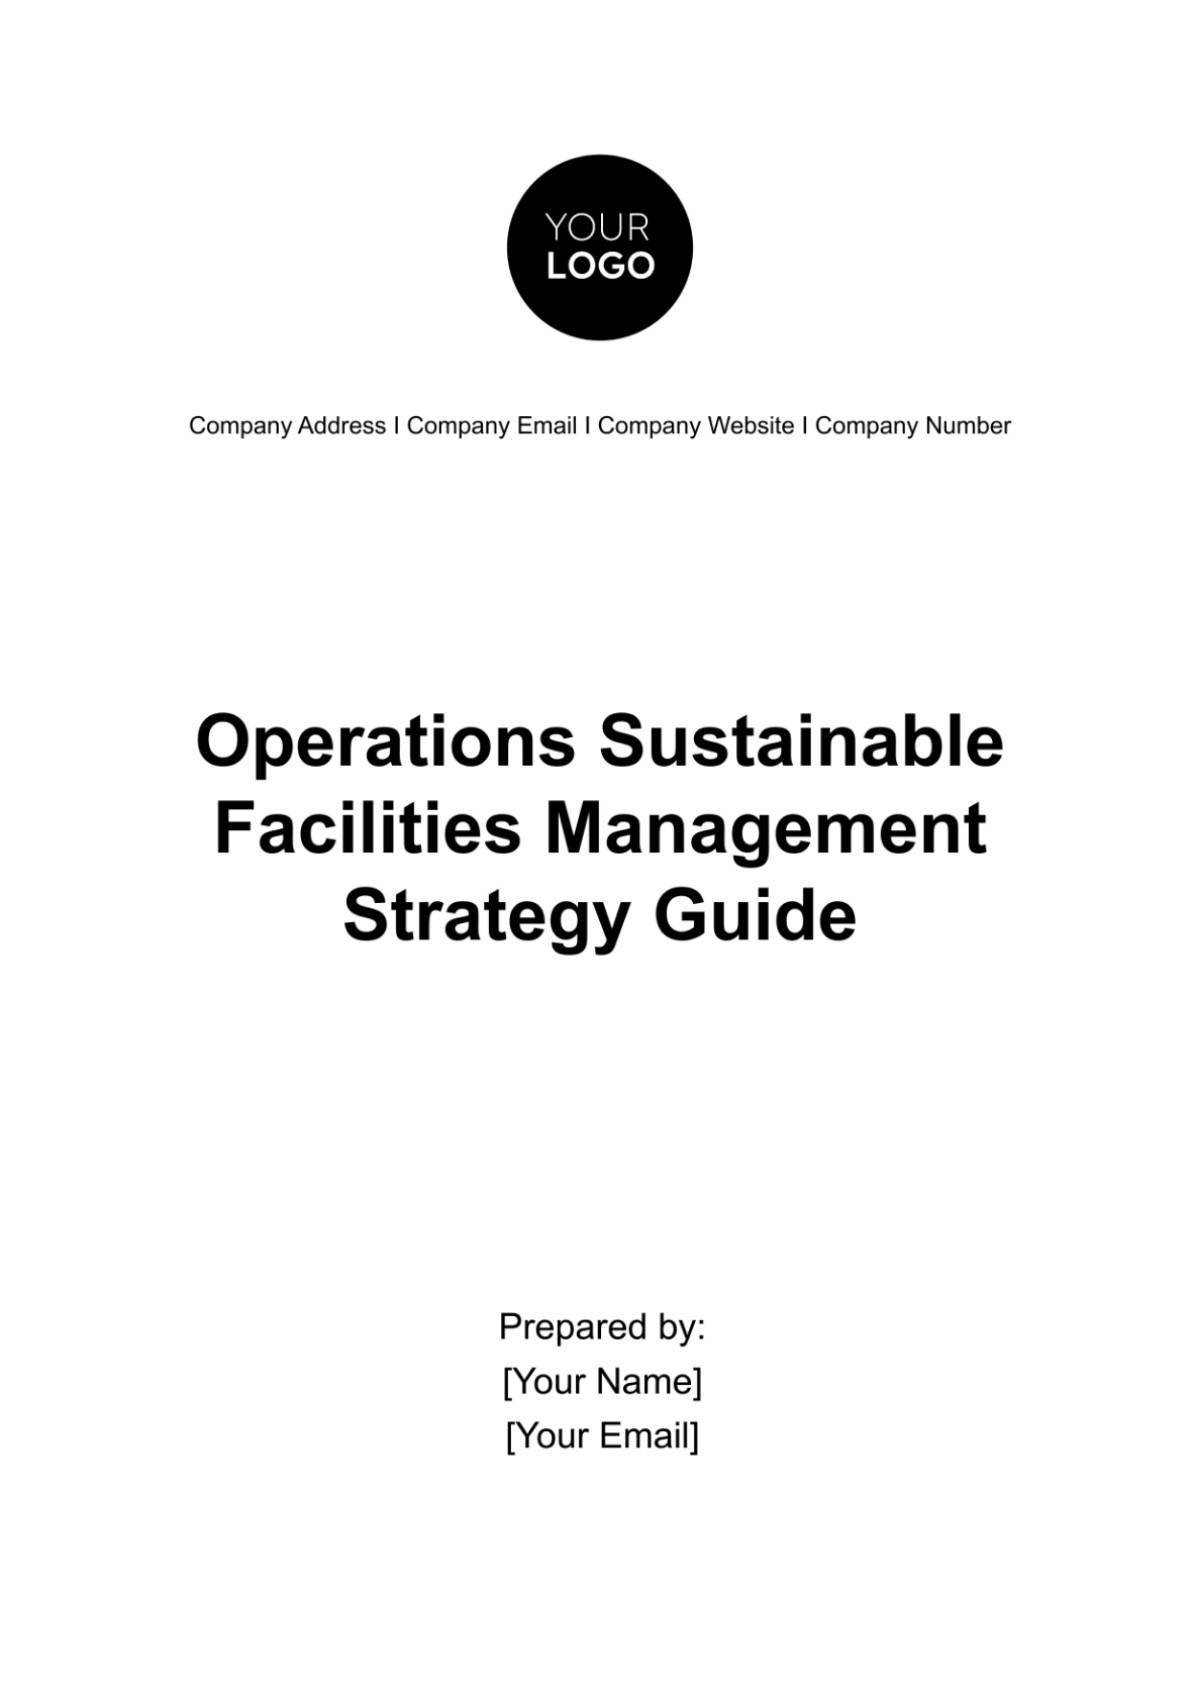 Operations Sustainable Facilities Management Strategy Guide Template